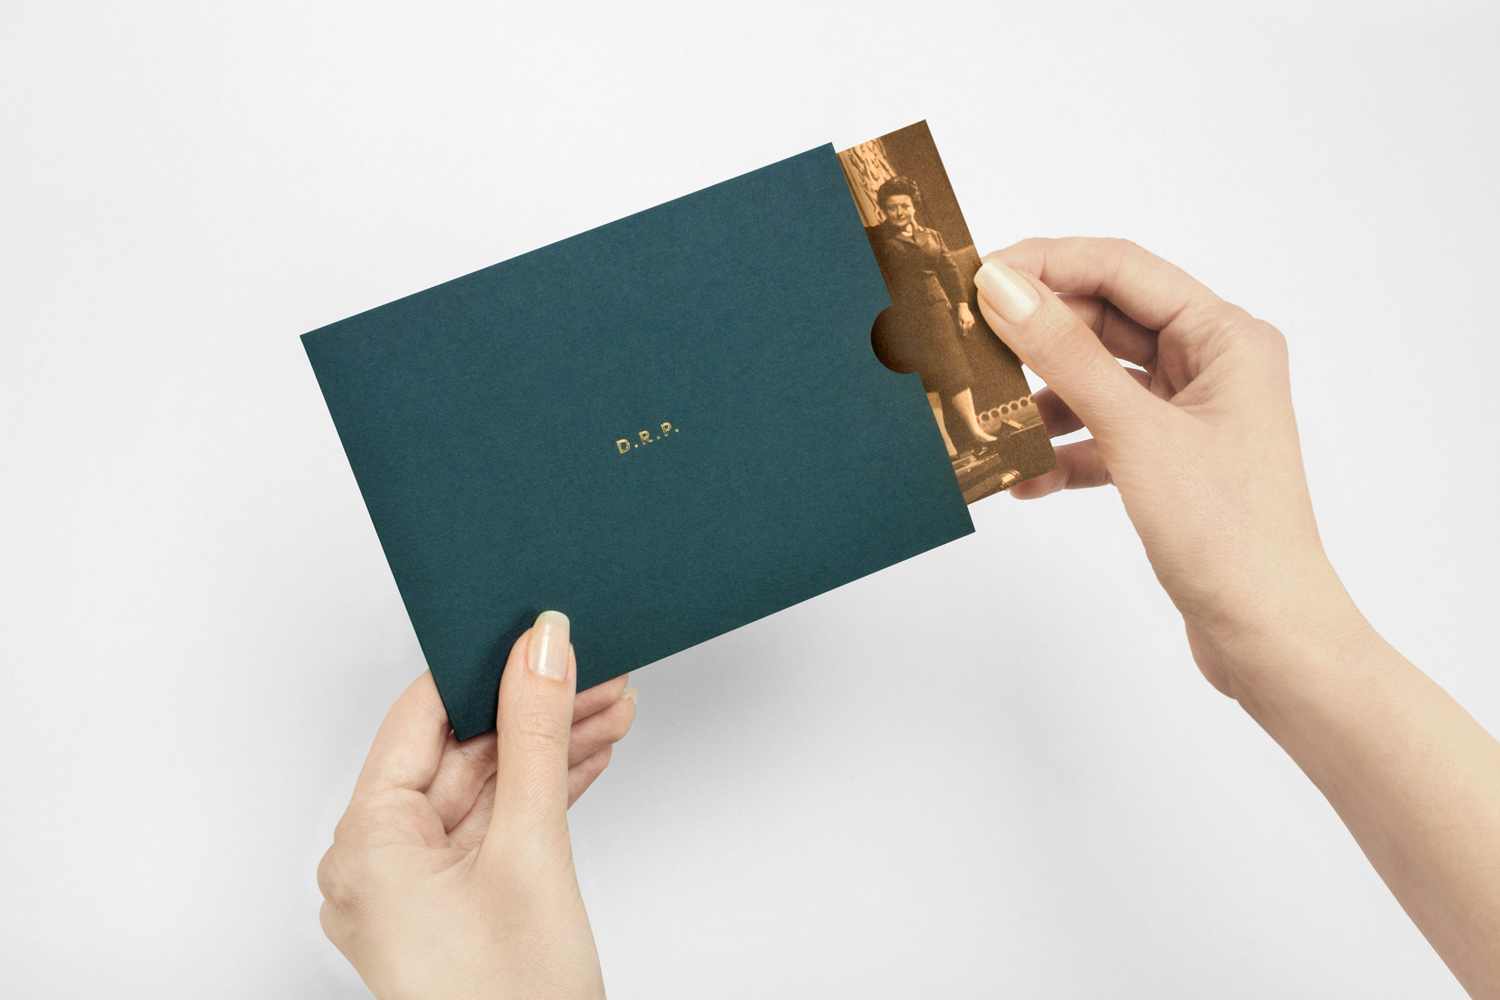 Brand identity and print with gold foil detail designed by London-based studio Two Times Elliott for Soho members bar Disrepute